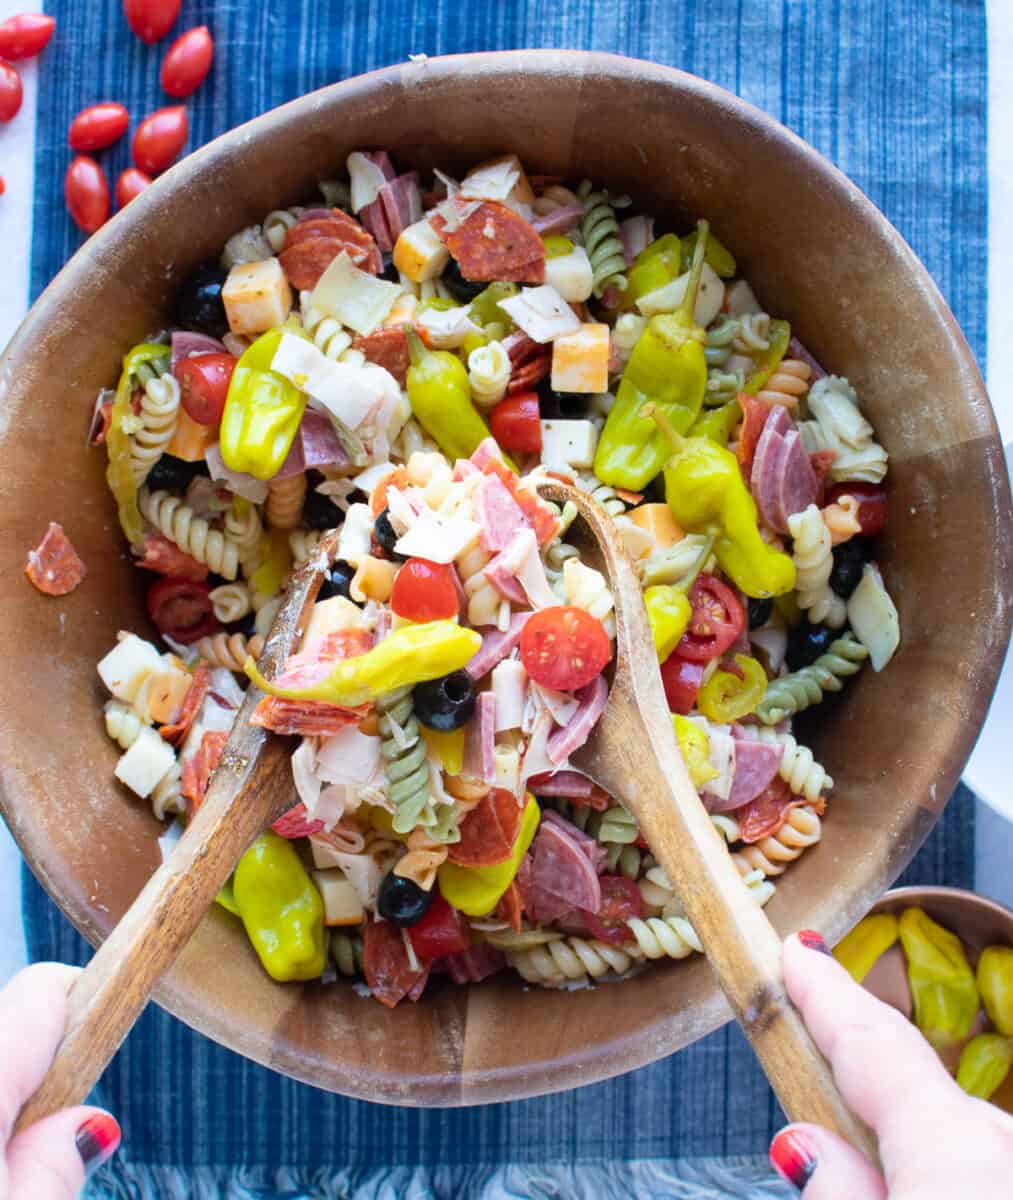 mixing all ingredients of pasta salad together in a large wooden bowl